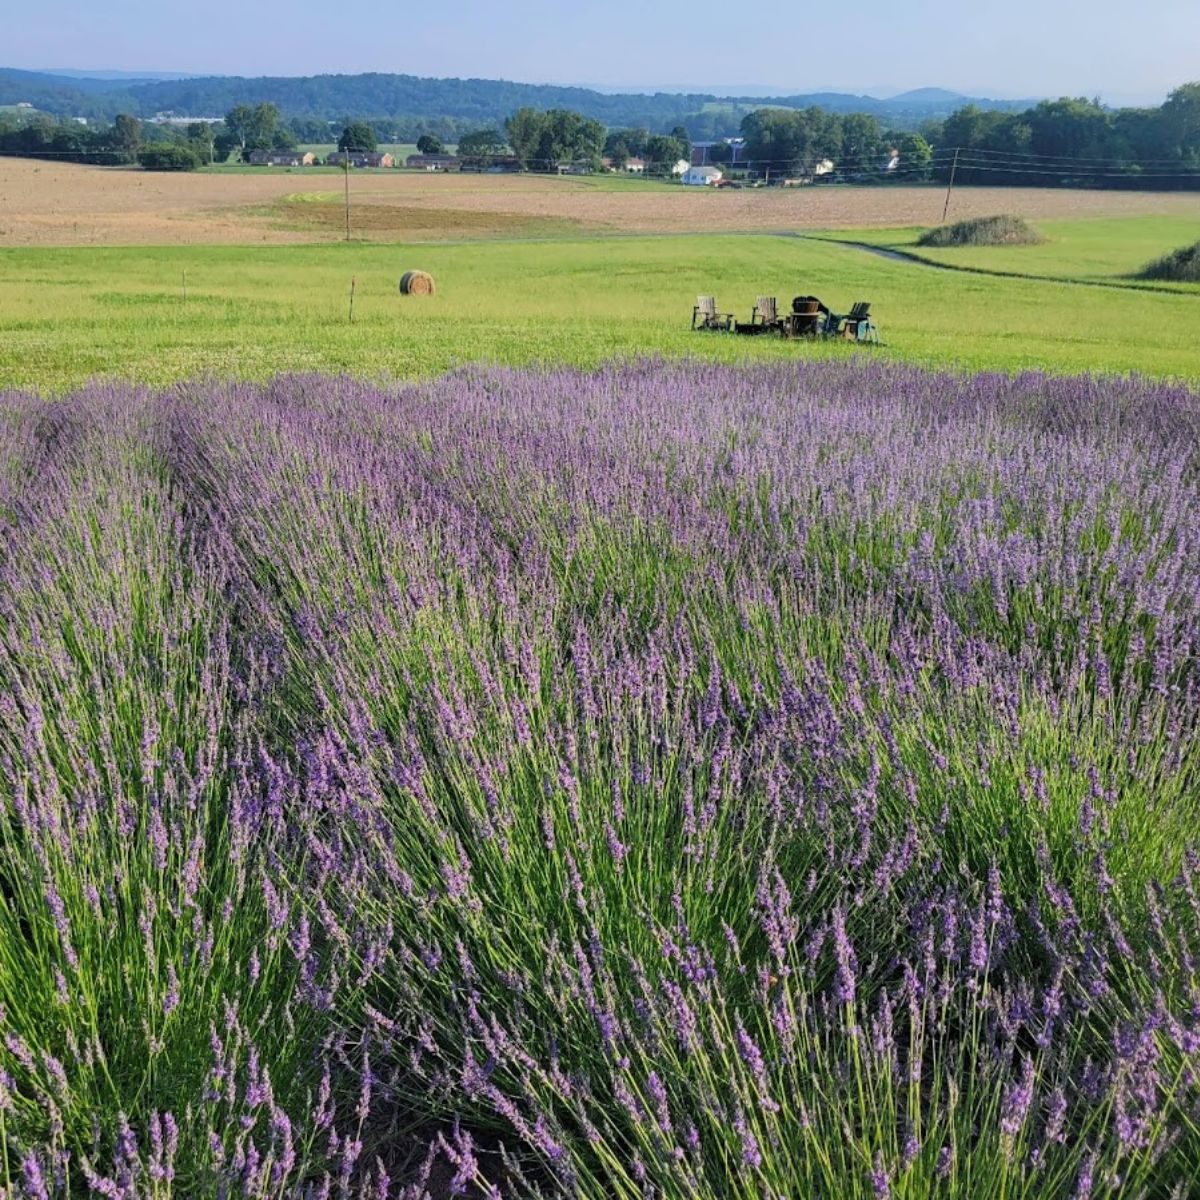 Lavender growing at the top of a roiling hill.